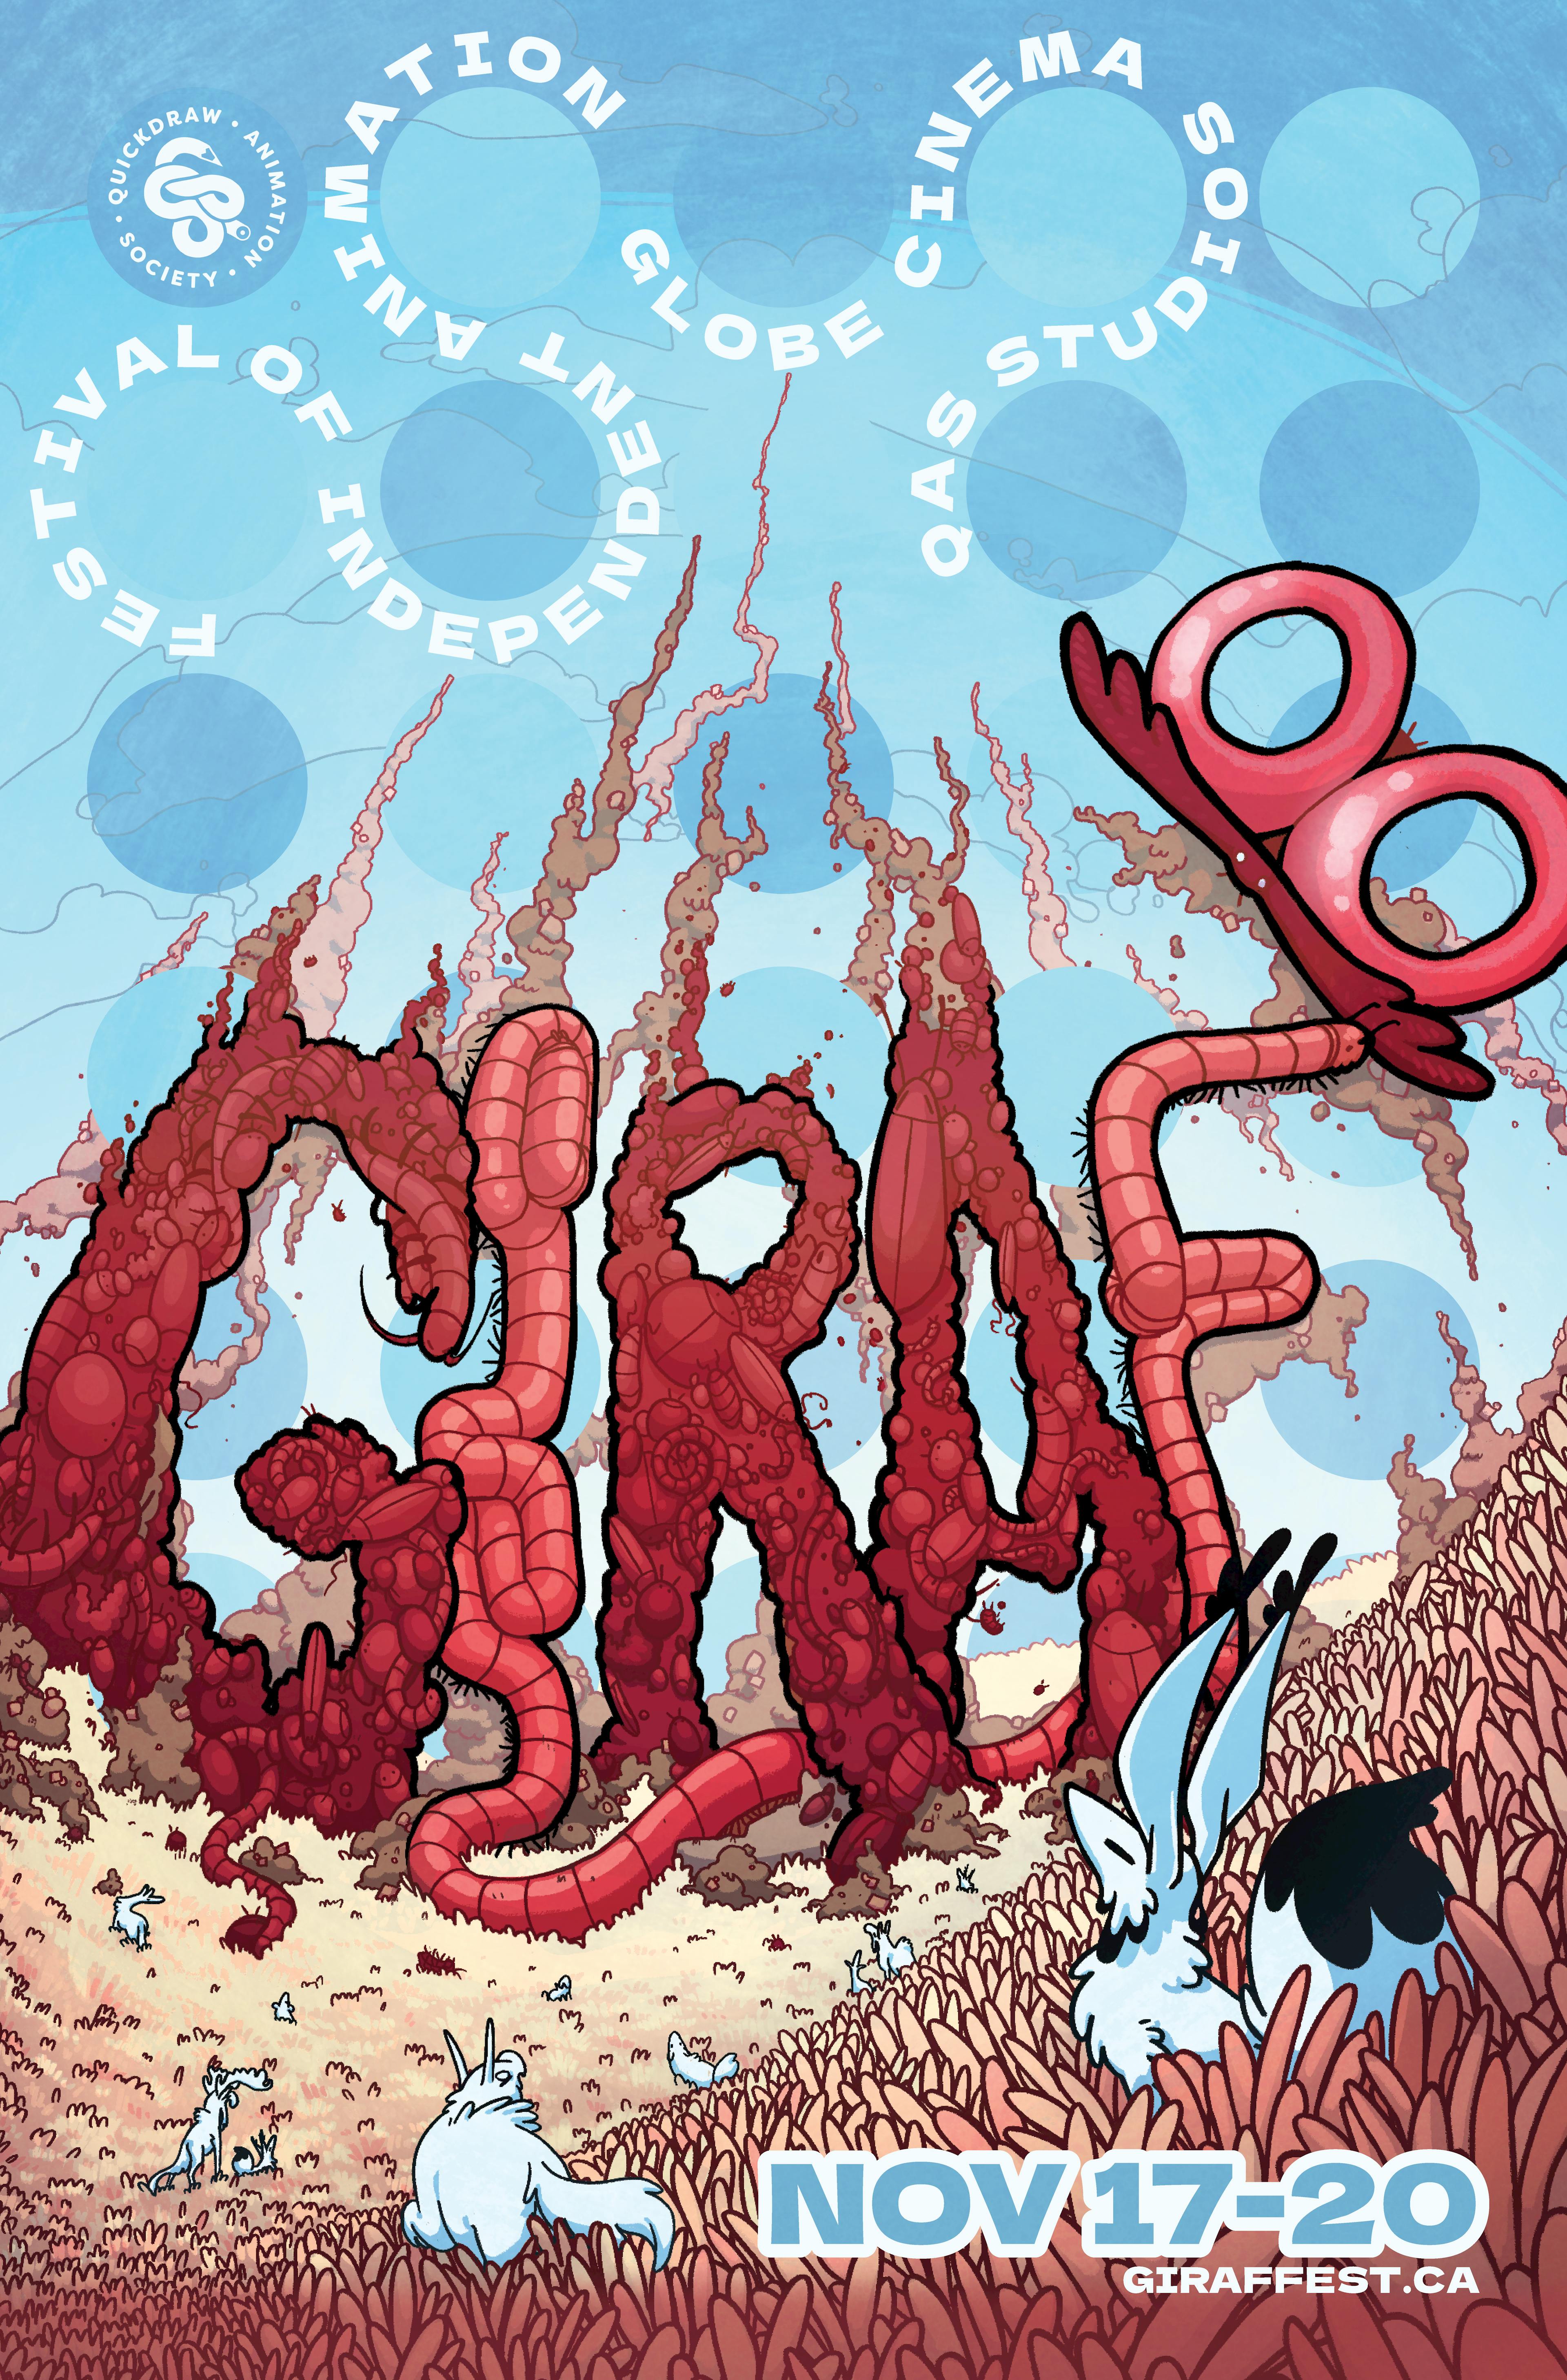 giraf 18 poster. Different creatures on the prairie look up towards a towering pile of giant bugs that spell out "GIRAF 18"